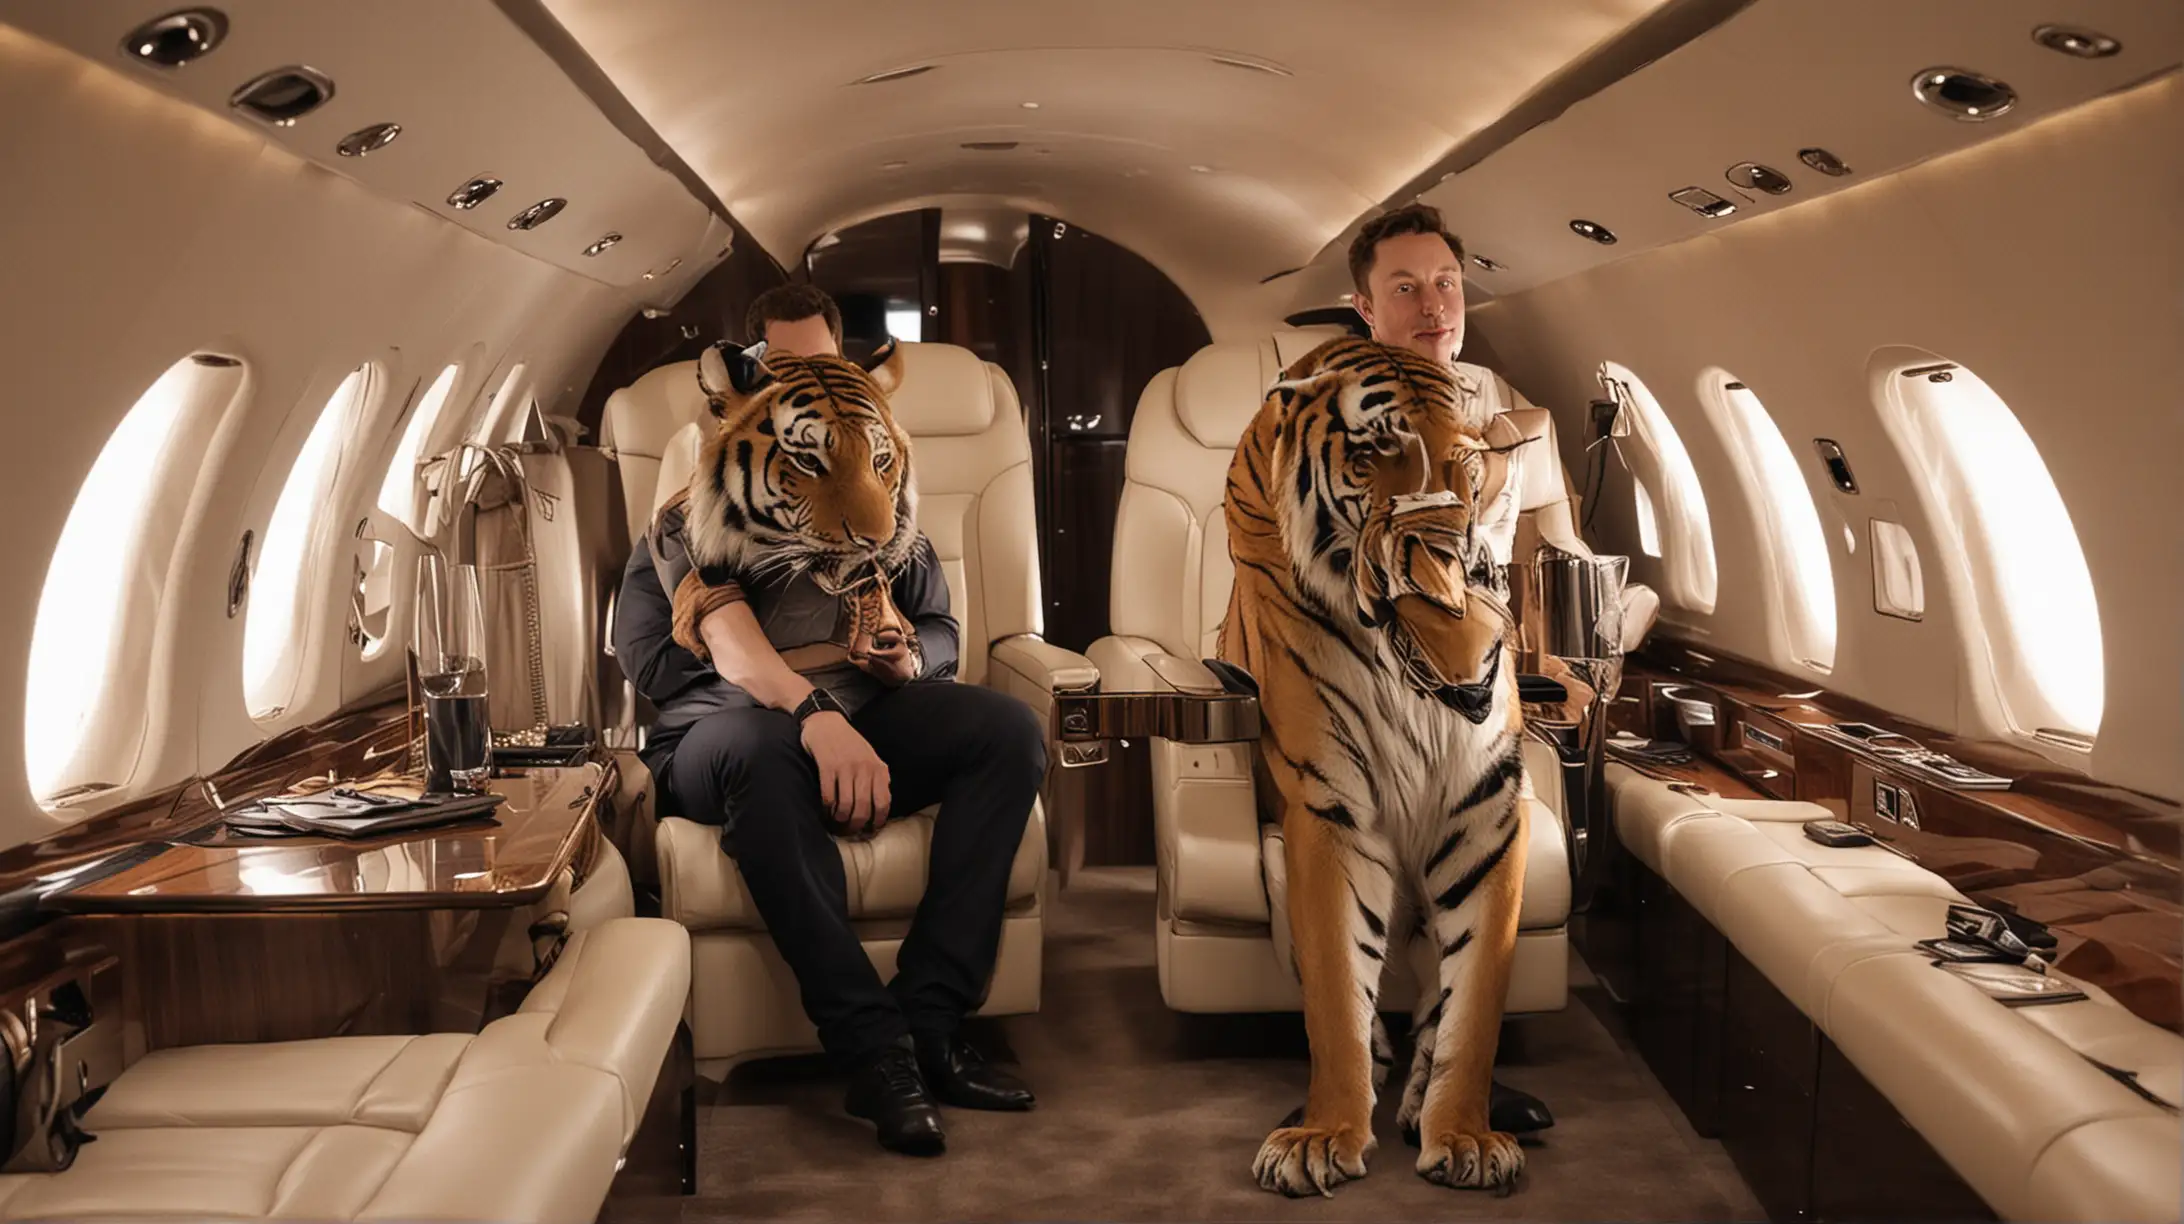 Elon Musk Relaxing Inside Luxury Private Jet with a Tiger Companion